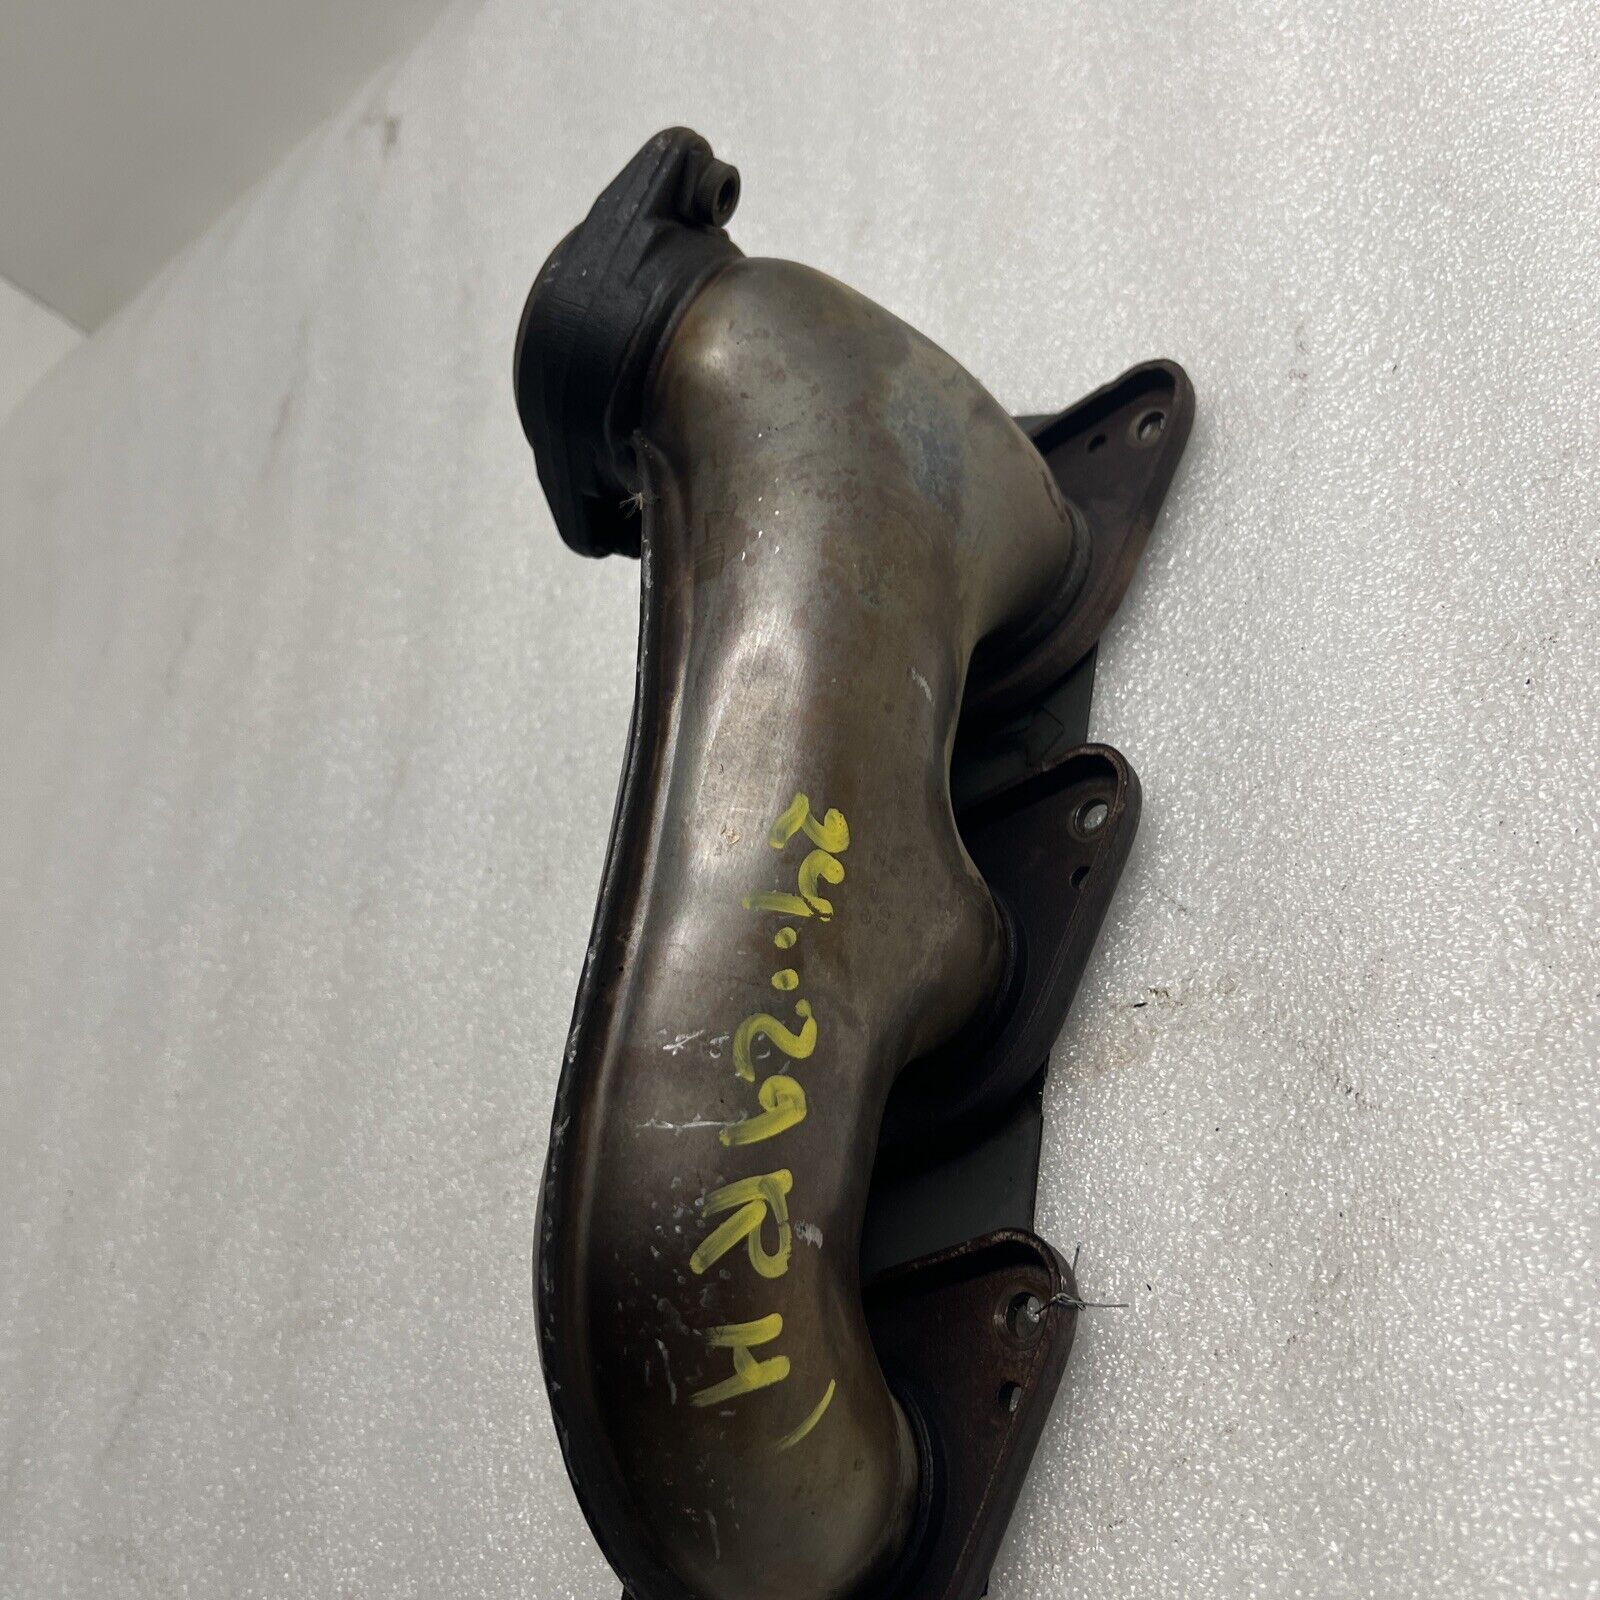 2010  MERCEDES-BENZ C300 RIGHT  SIDE EXHAUST MANIFOLD HEADER A2721402209 OEM